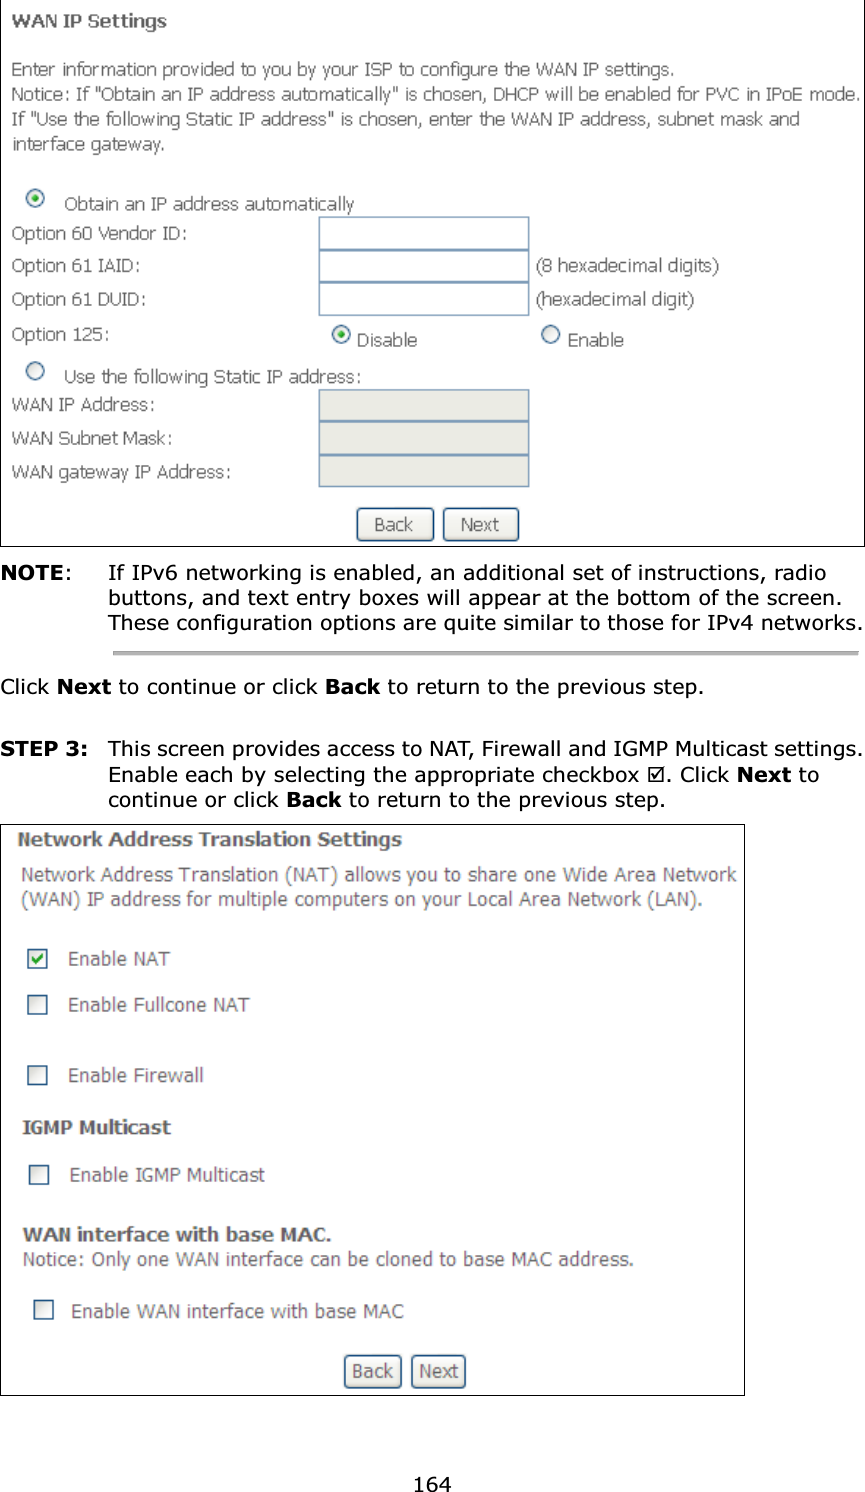  164 NOTE:  If IPv6 networking is enabled, an additional set of instructions, radio buttons, and text entry boxes will appear at the bottom of the screen.   These configuration options are quite similar to those for IPv4 networks. Click Next to continue or click Back to return to the previous step.  STEP 3:  This screen provides access to NAT, Firewall and IGMP Multicast settings. Enable each by selecting the appropriate checkbox . Click Next to continue or click Back to return to the previous step.   